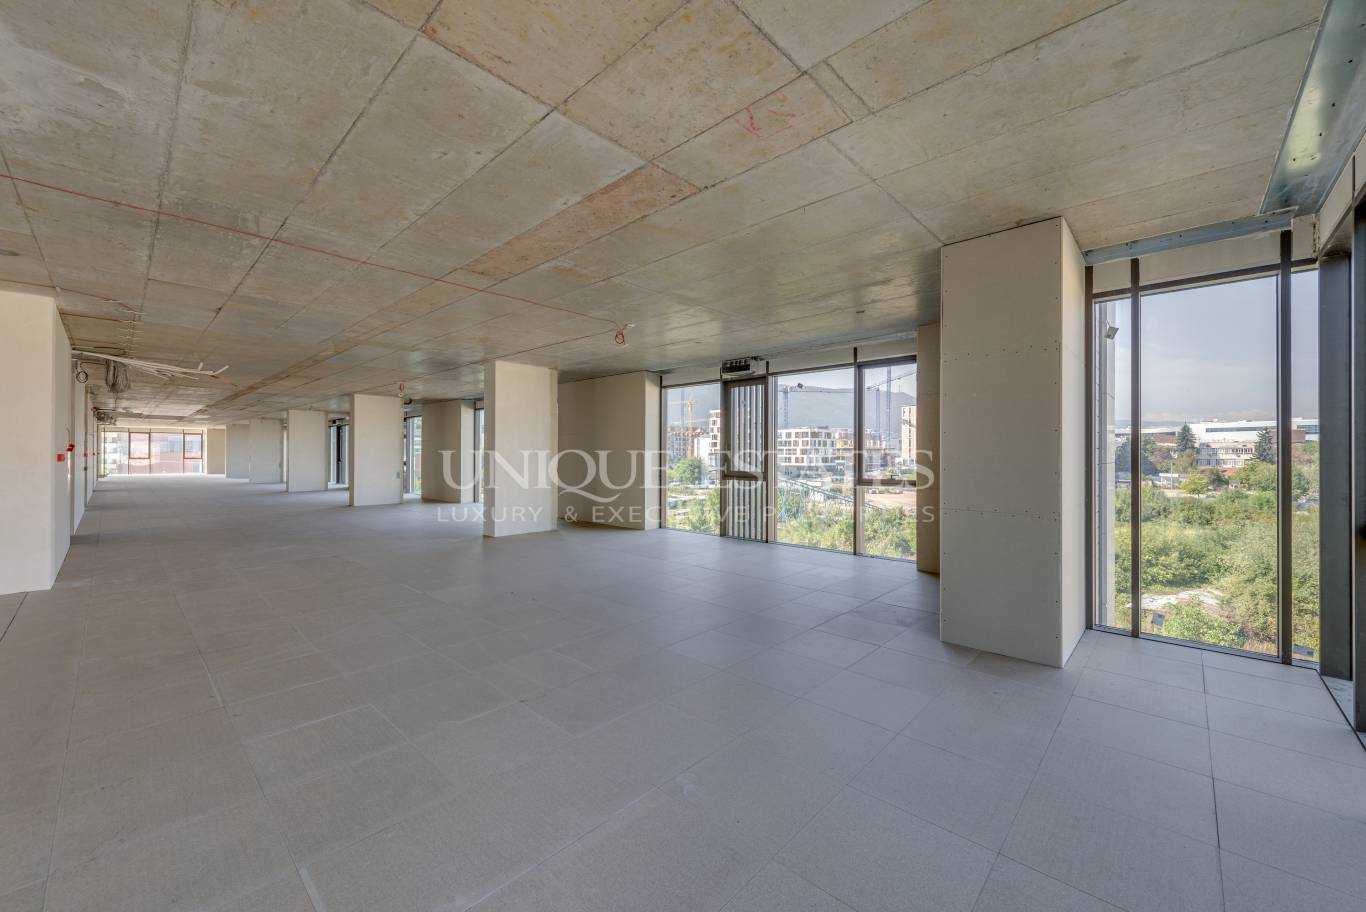 Office for sale in Sofia, Lozenets with listing ID: K14348 - image 1